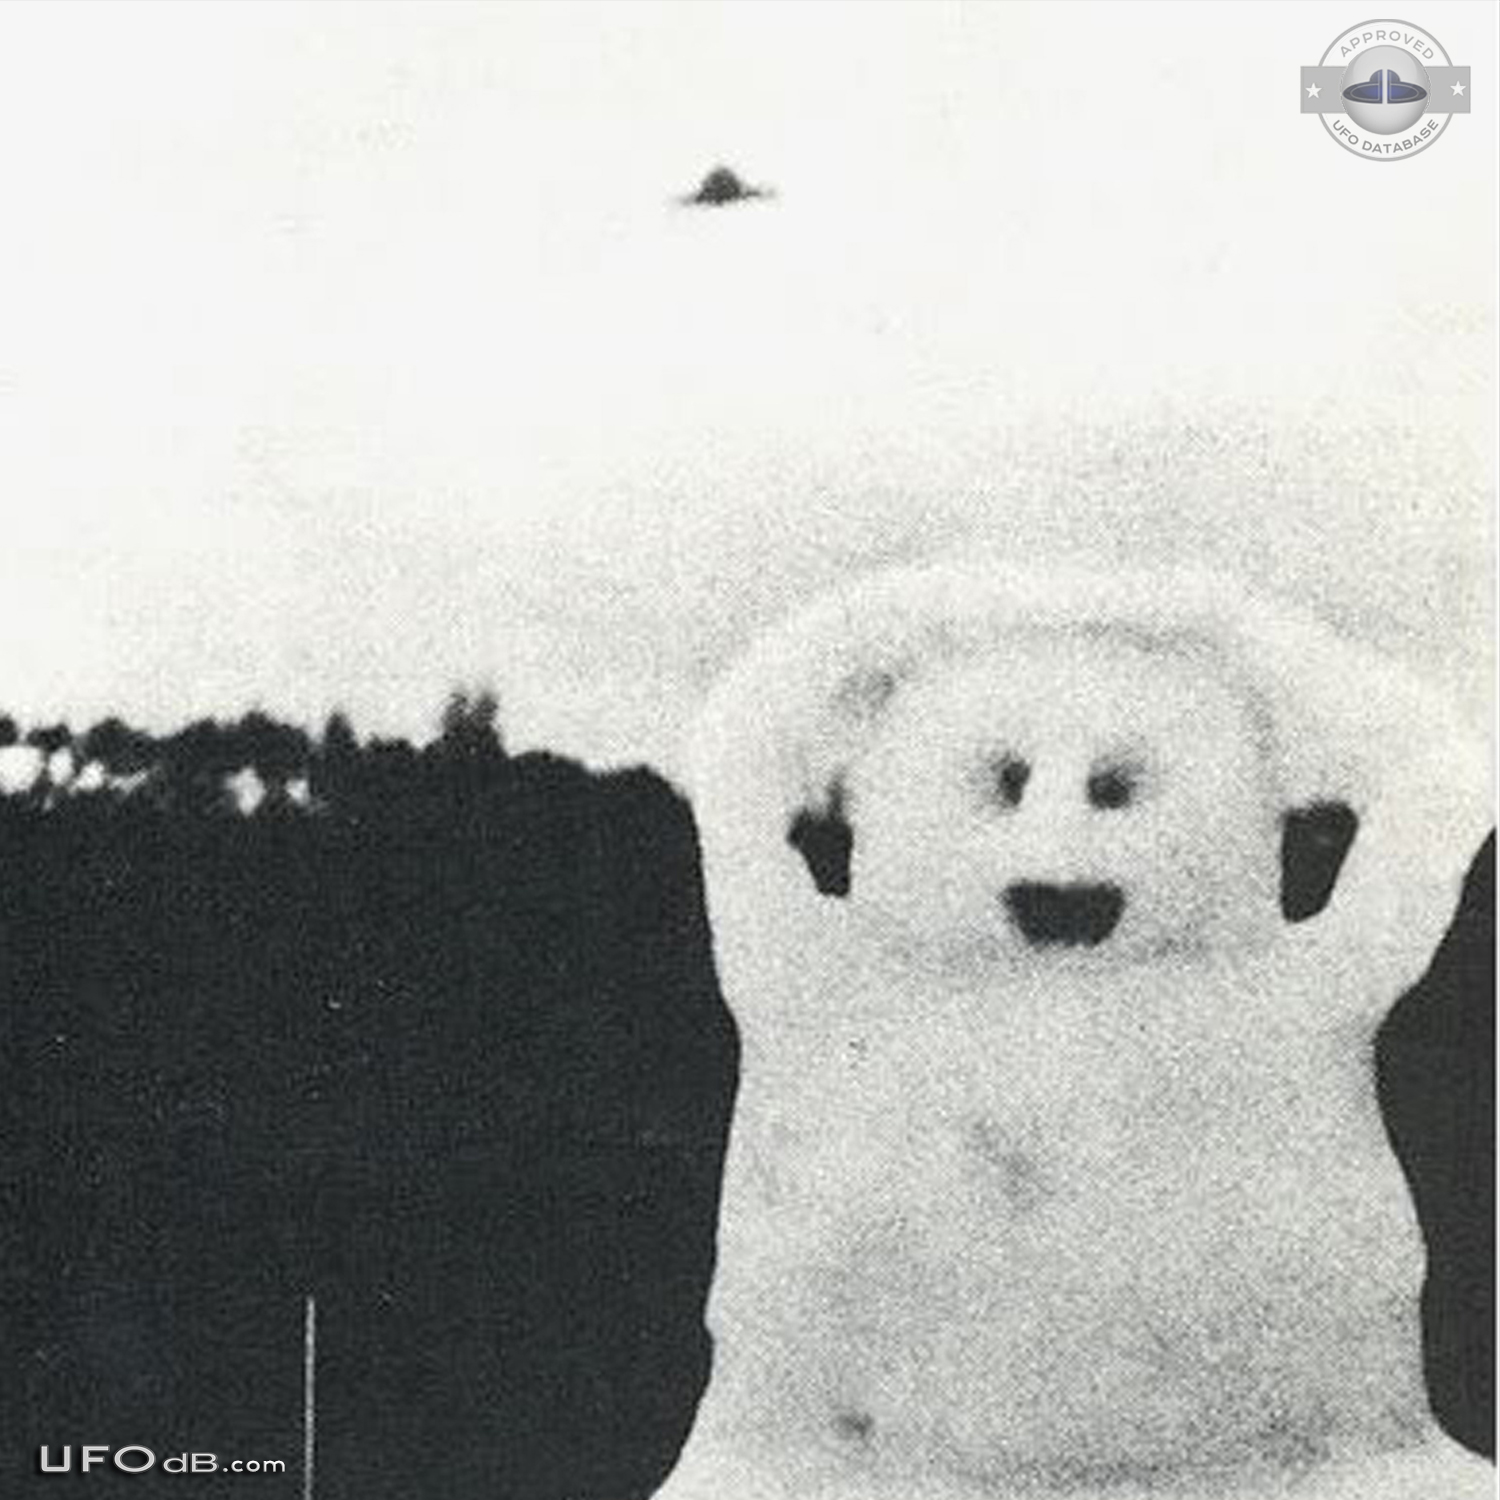 Picture of snowman in Nanaimo BC Canada gets a passing saucer UFO 1975 UFO Picture #498-2